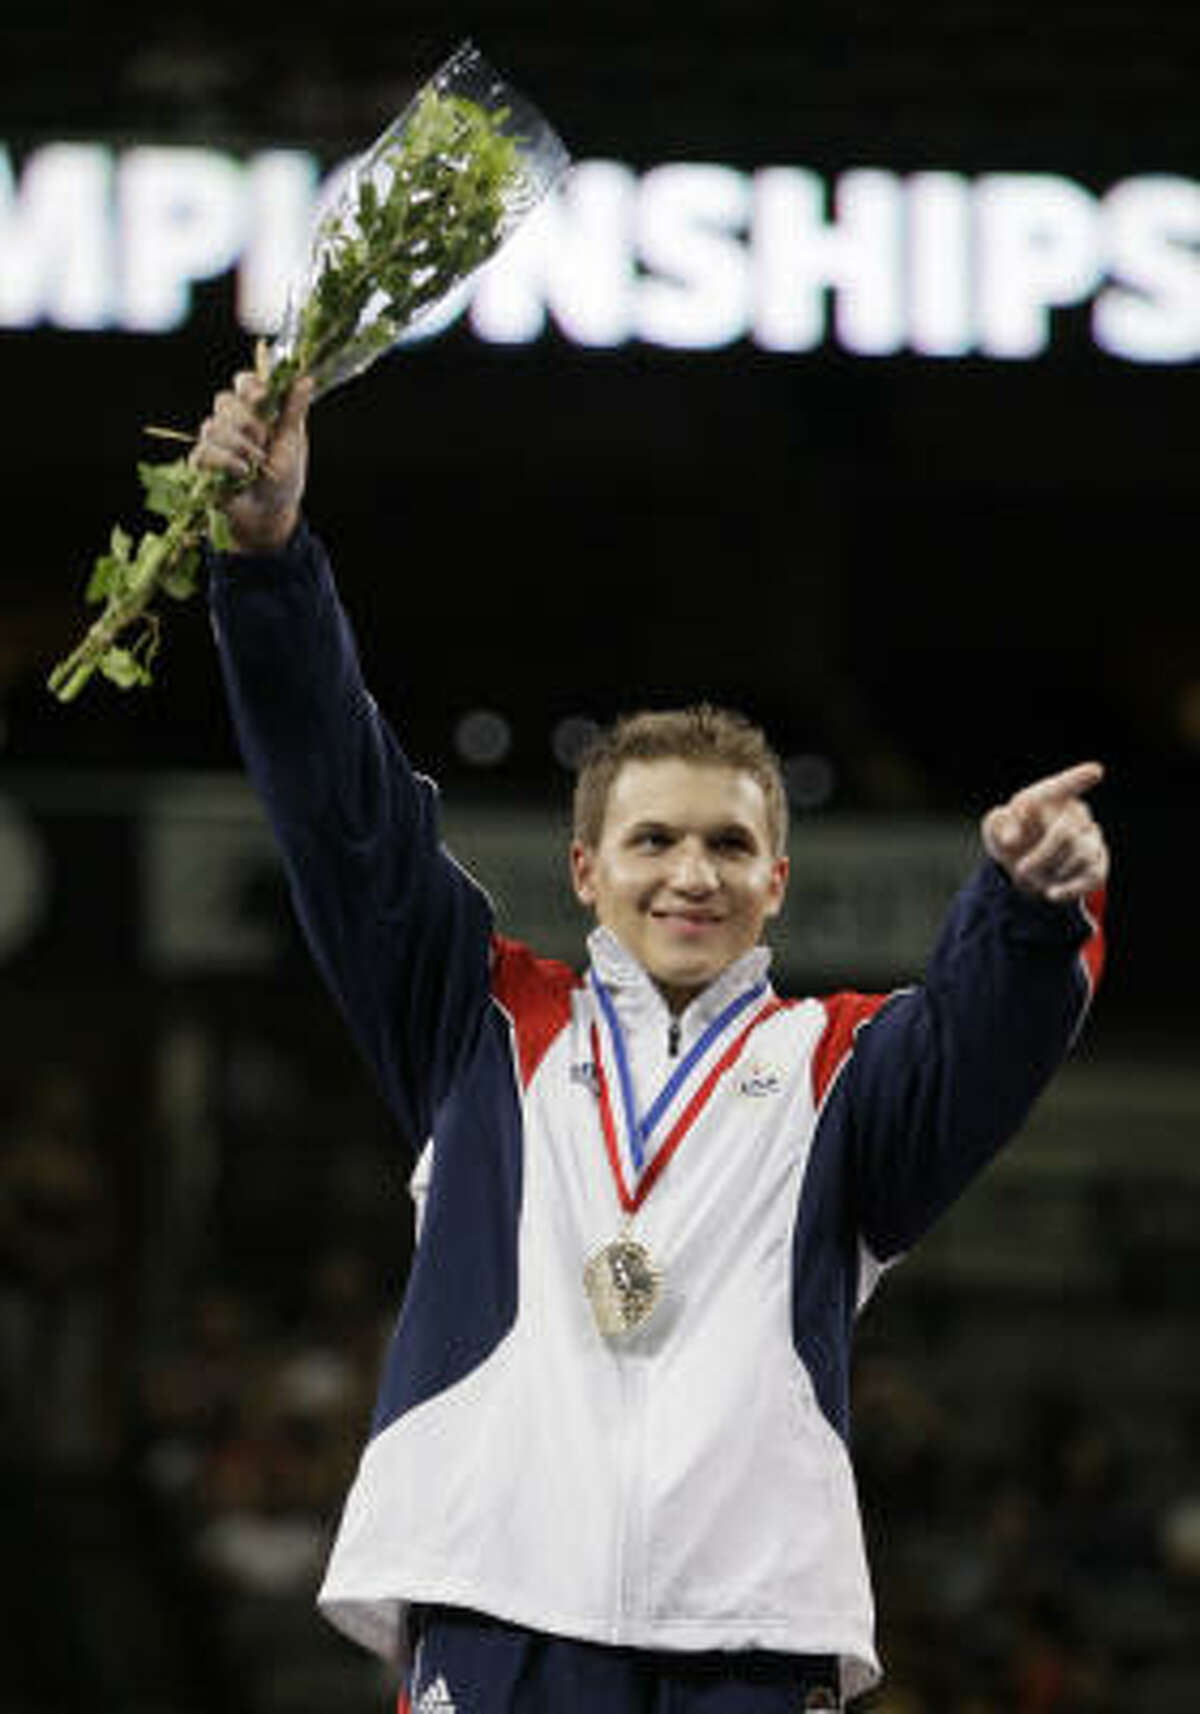 Jonathan Horton reacts to cheers from the crowd during the award ceremony following the the U.S. gymnastics championships Friday in Dallas. Horton was the all-around winner.